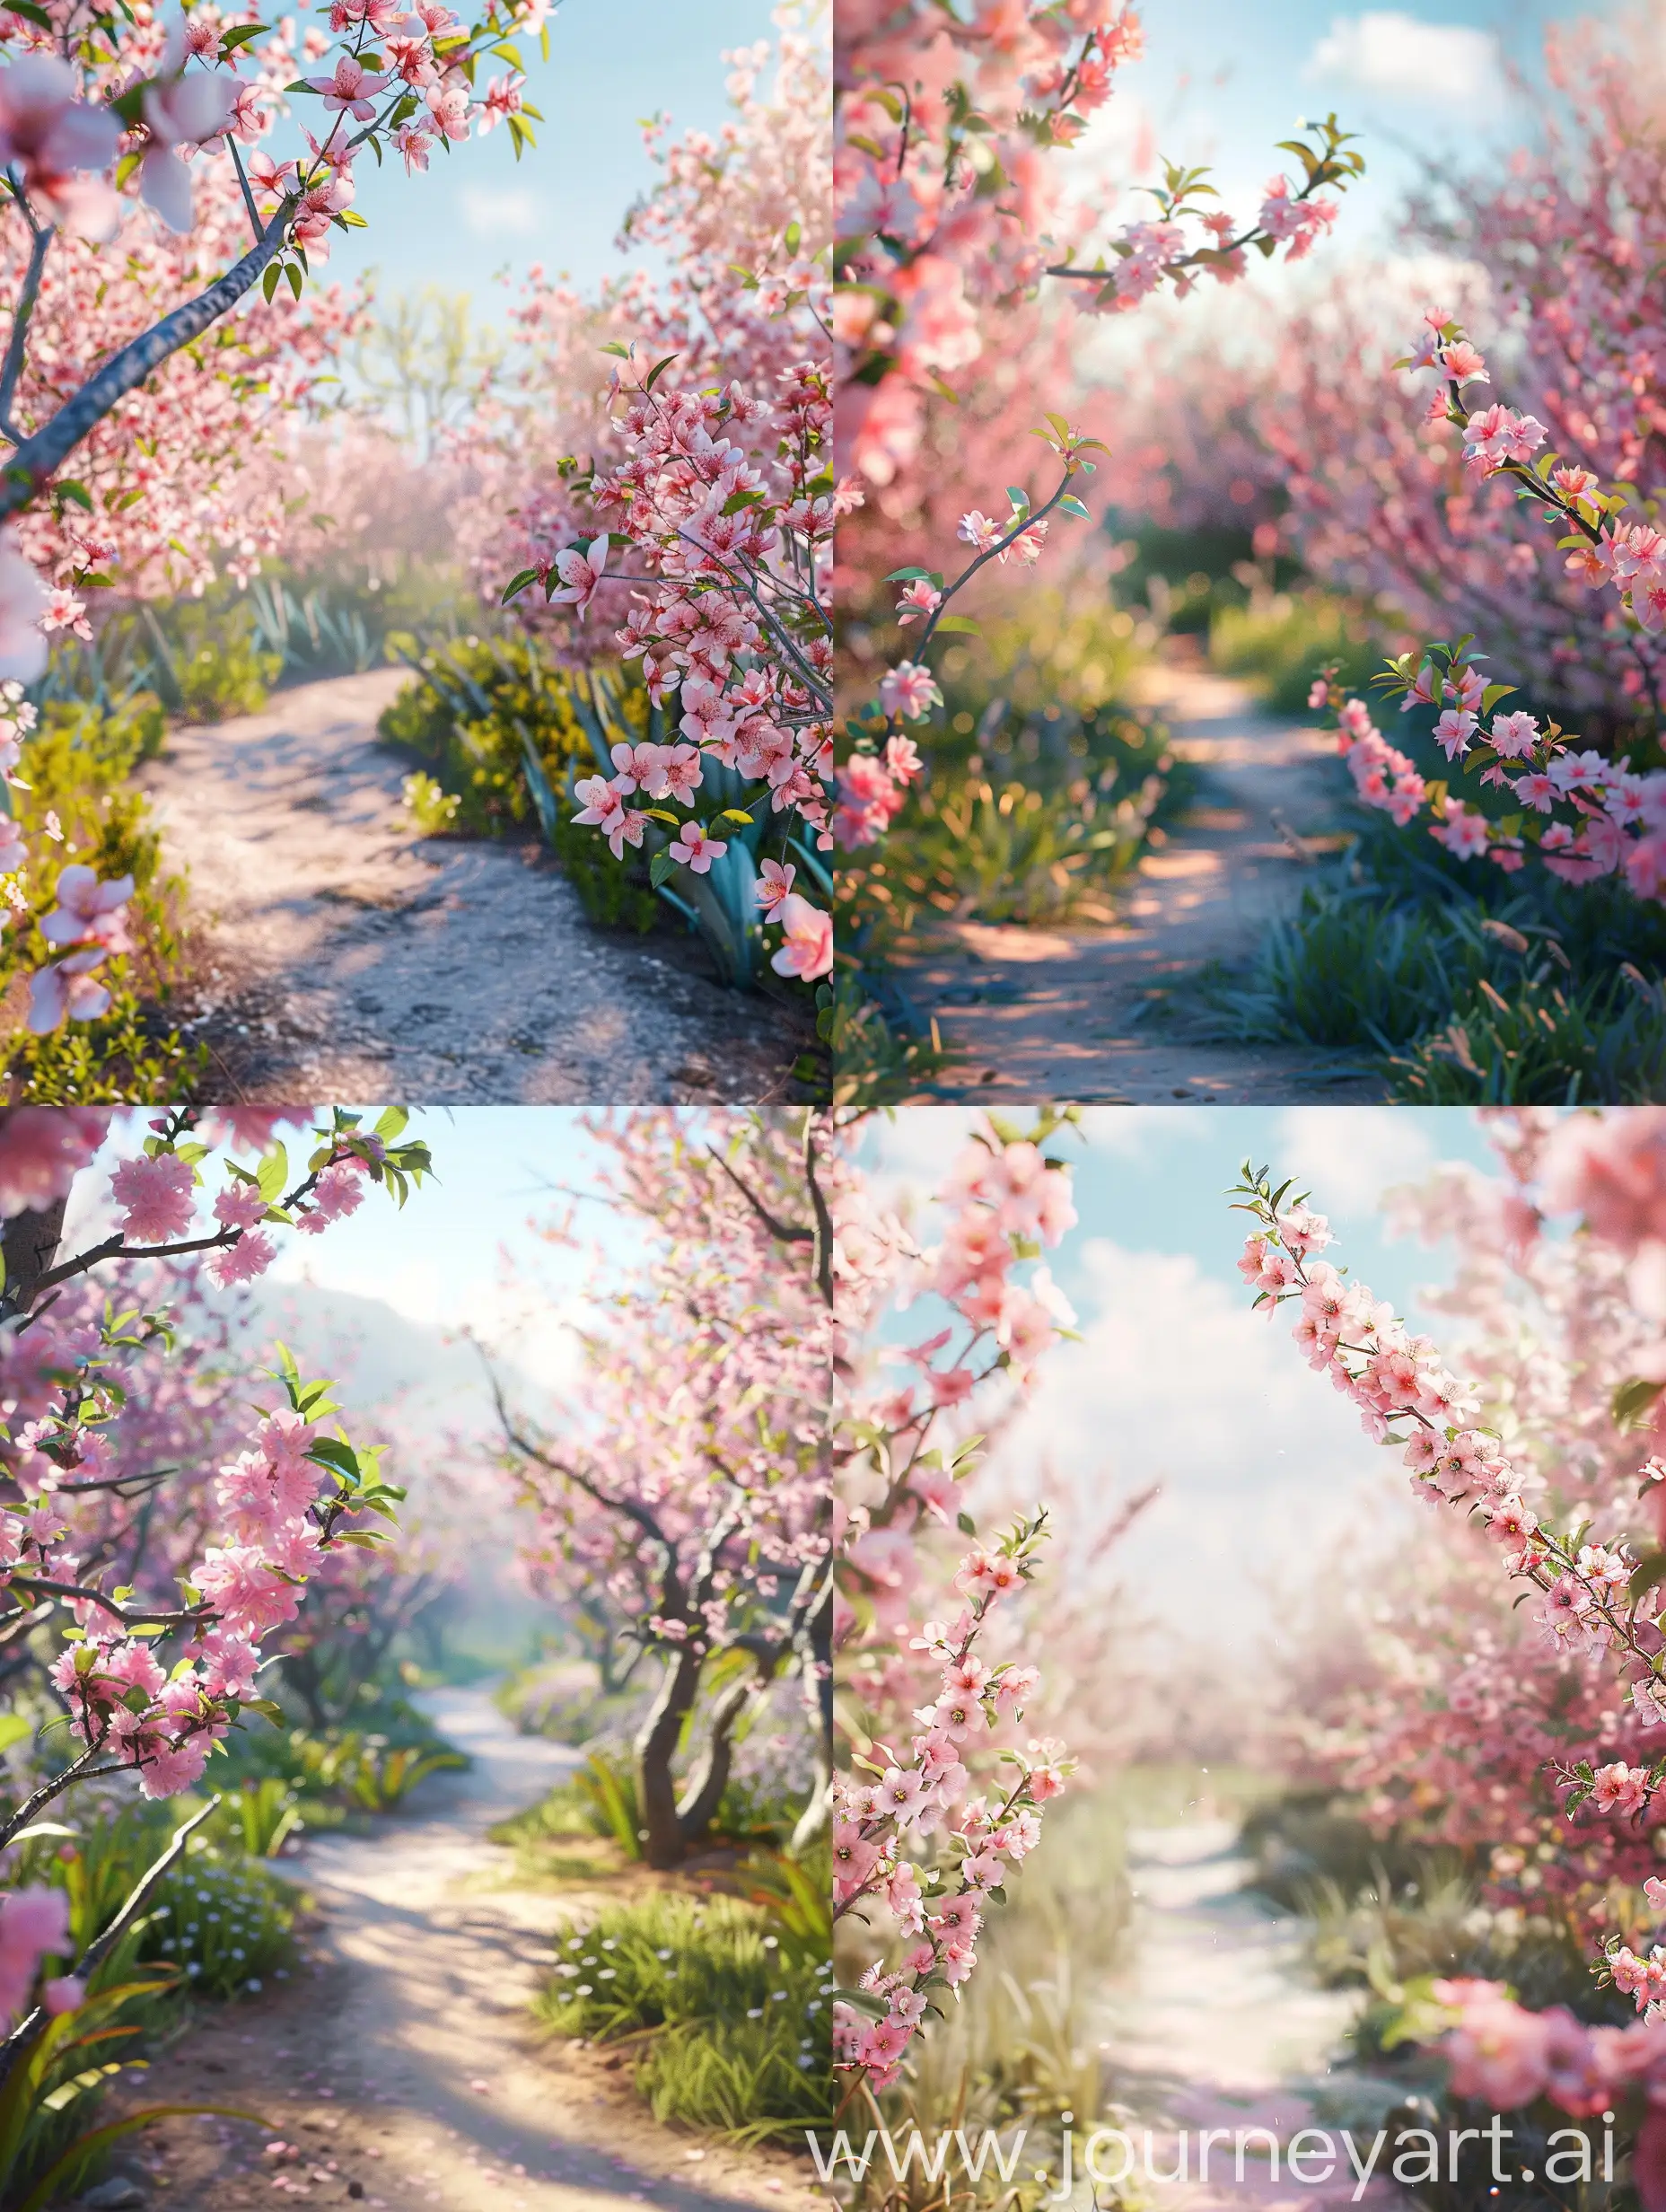 Tranquil-Spring-Peach-Blossom-Garden-Landscape-with-Sunny-Weather